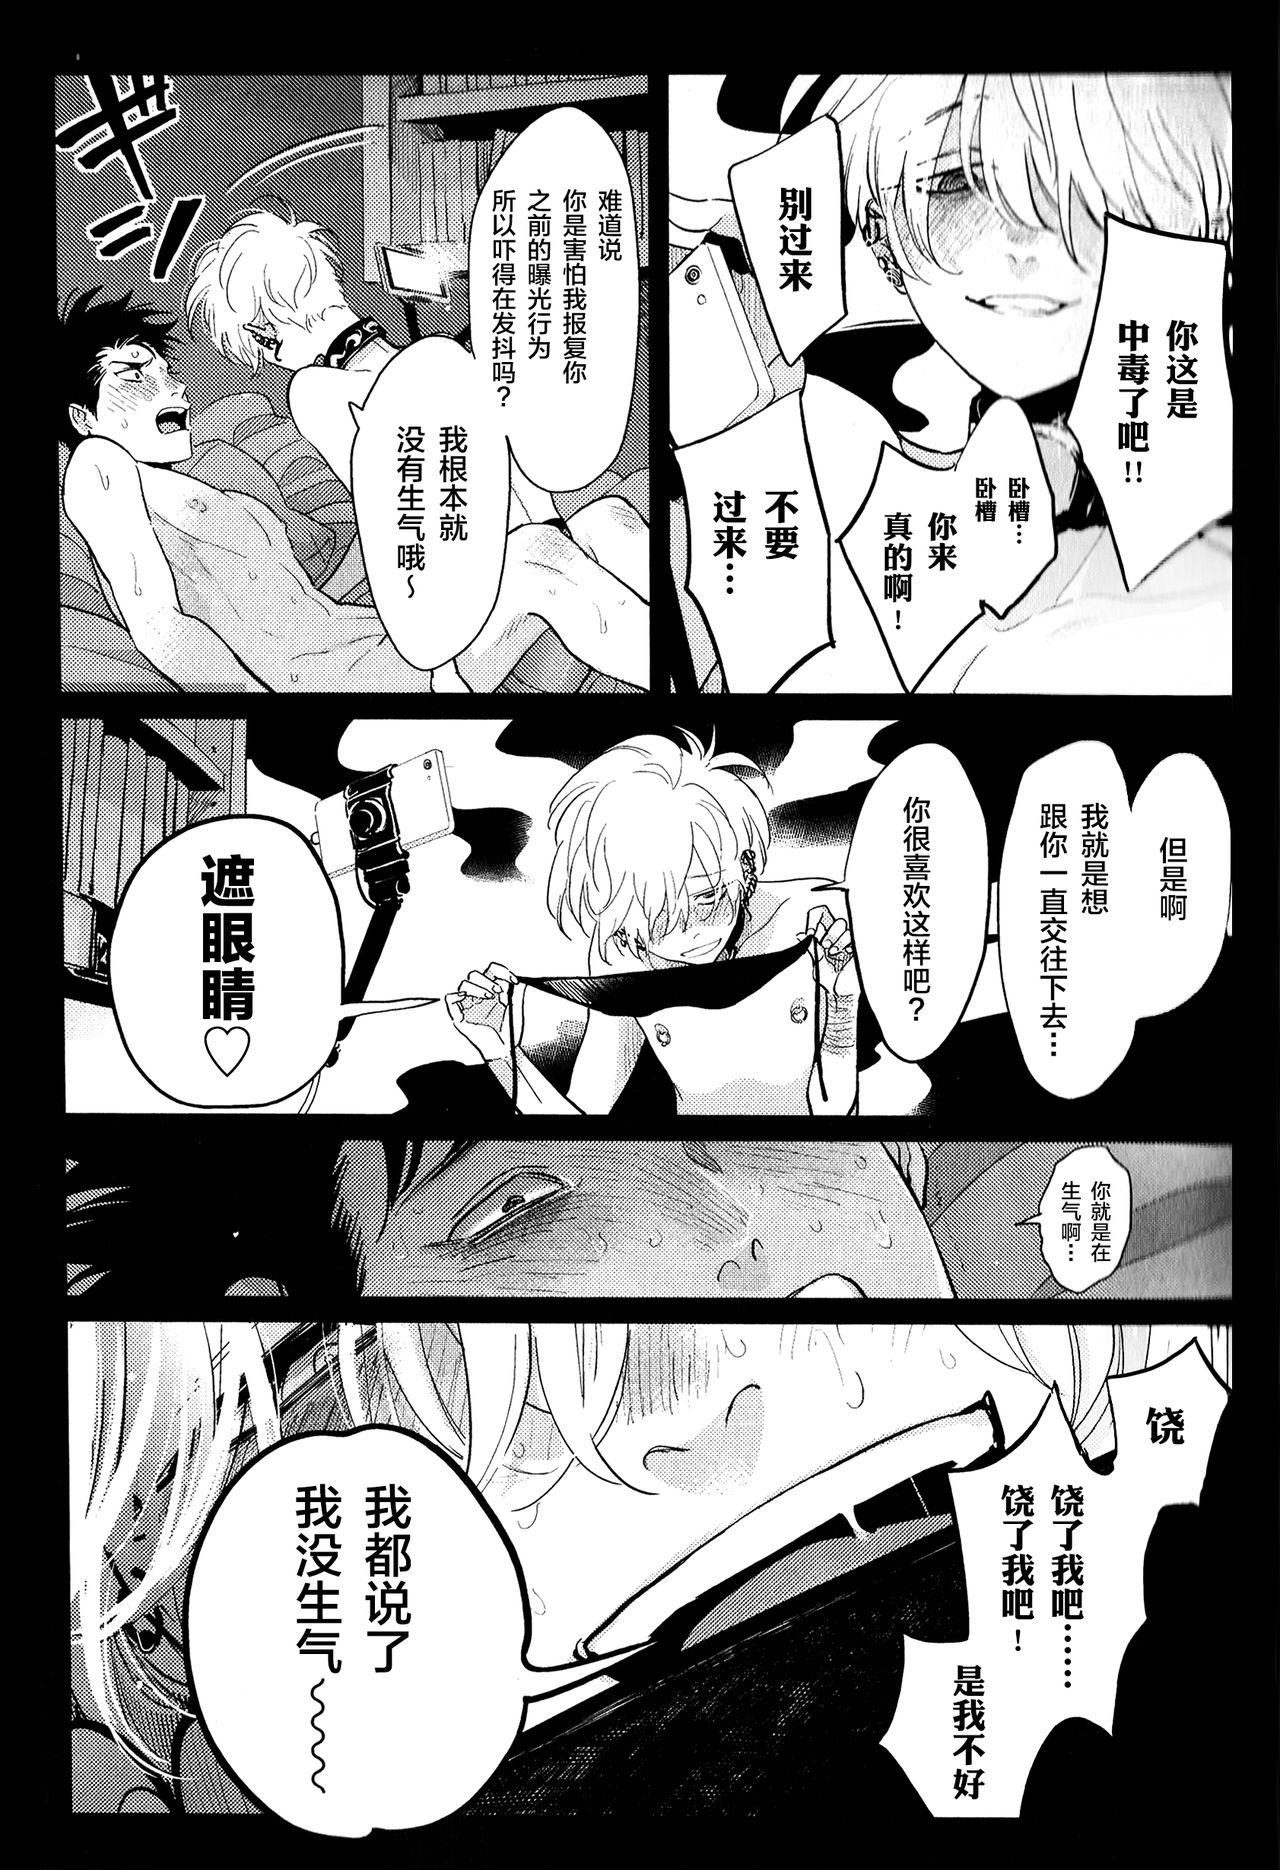 [Harada] Doku to Sex (immoral sex) [Chinese] [新桥月白日语社] page 21 full